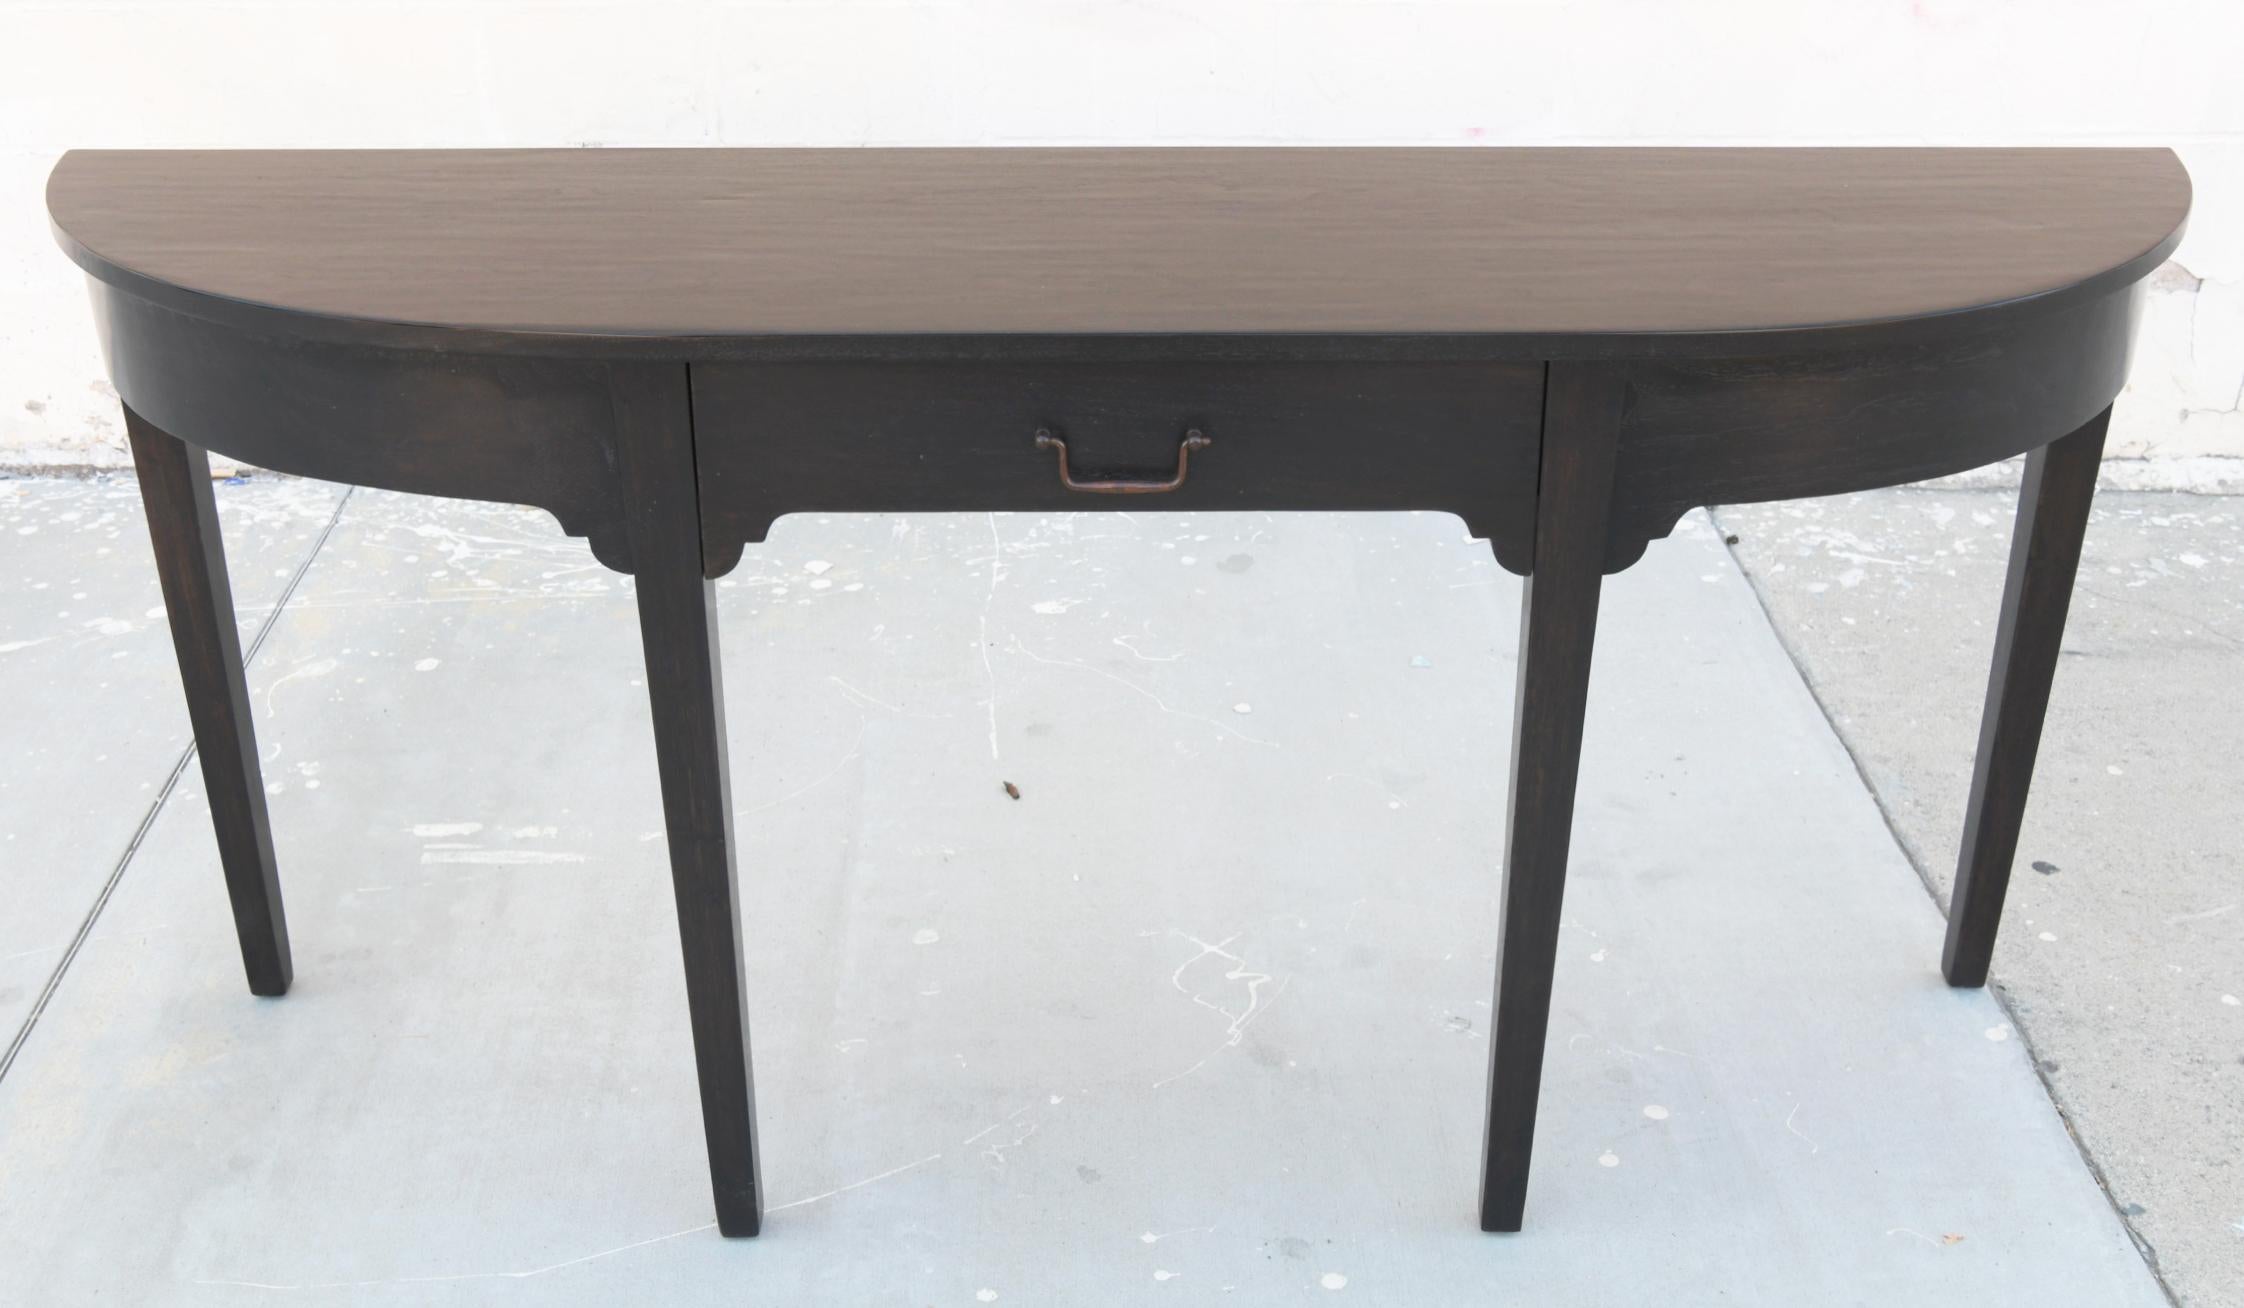 This distressed walnut table is seen here in H 34 in. x W 72.5 in. x D 20 in, however it can be built in any size.

Because each table is bench-made in our own Los Angeles workshop you can influence all aspects of design, including size, wood